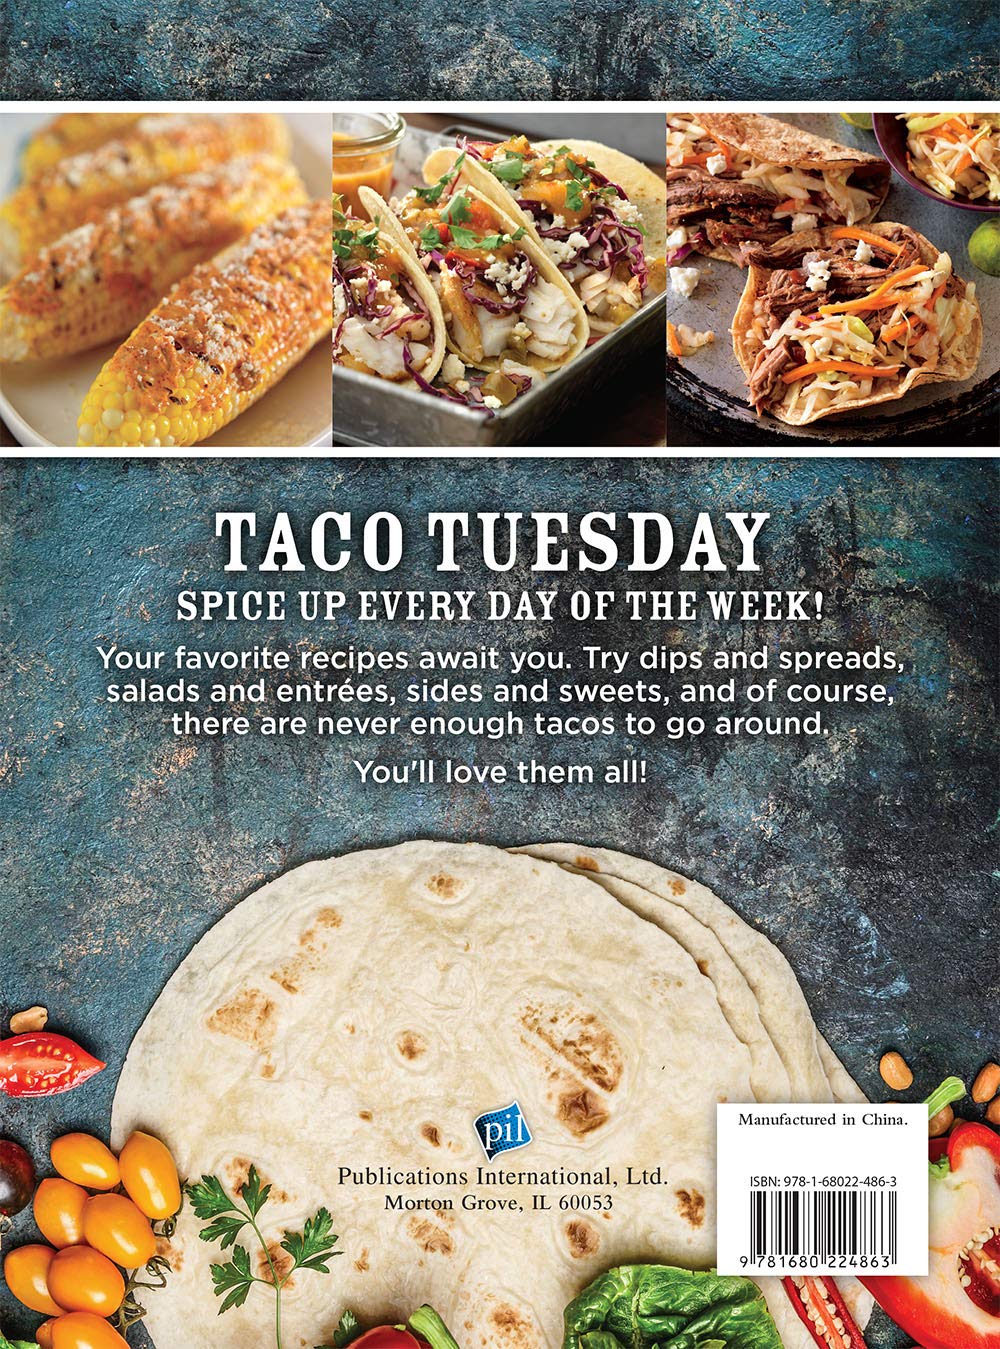 Taco Tuesday: More Than 100 Recipes for Appetizers, Meals, Sides and Sweets. Treat Every Day like It's Tuesday!